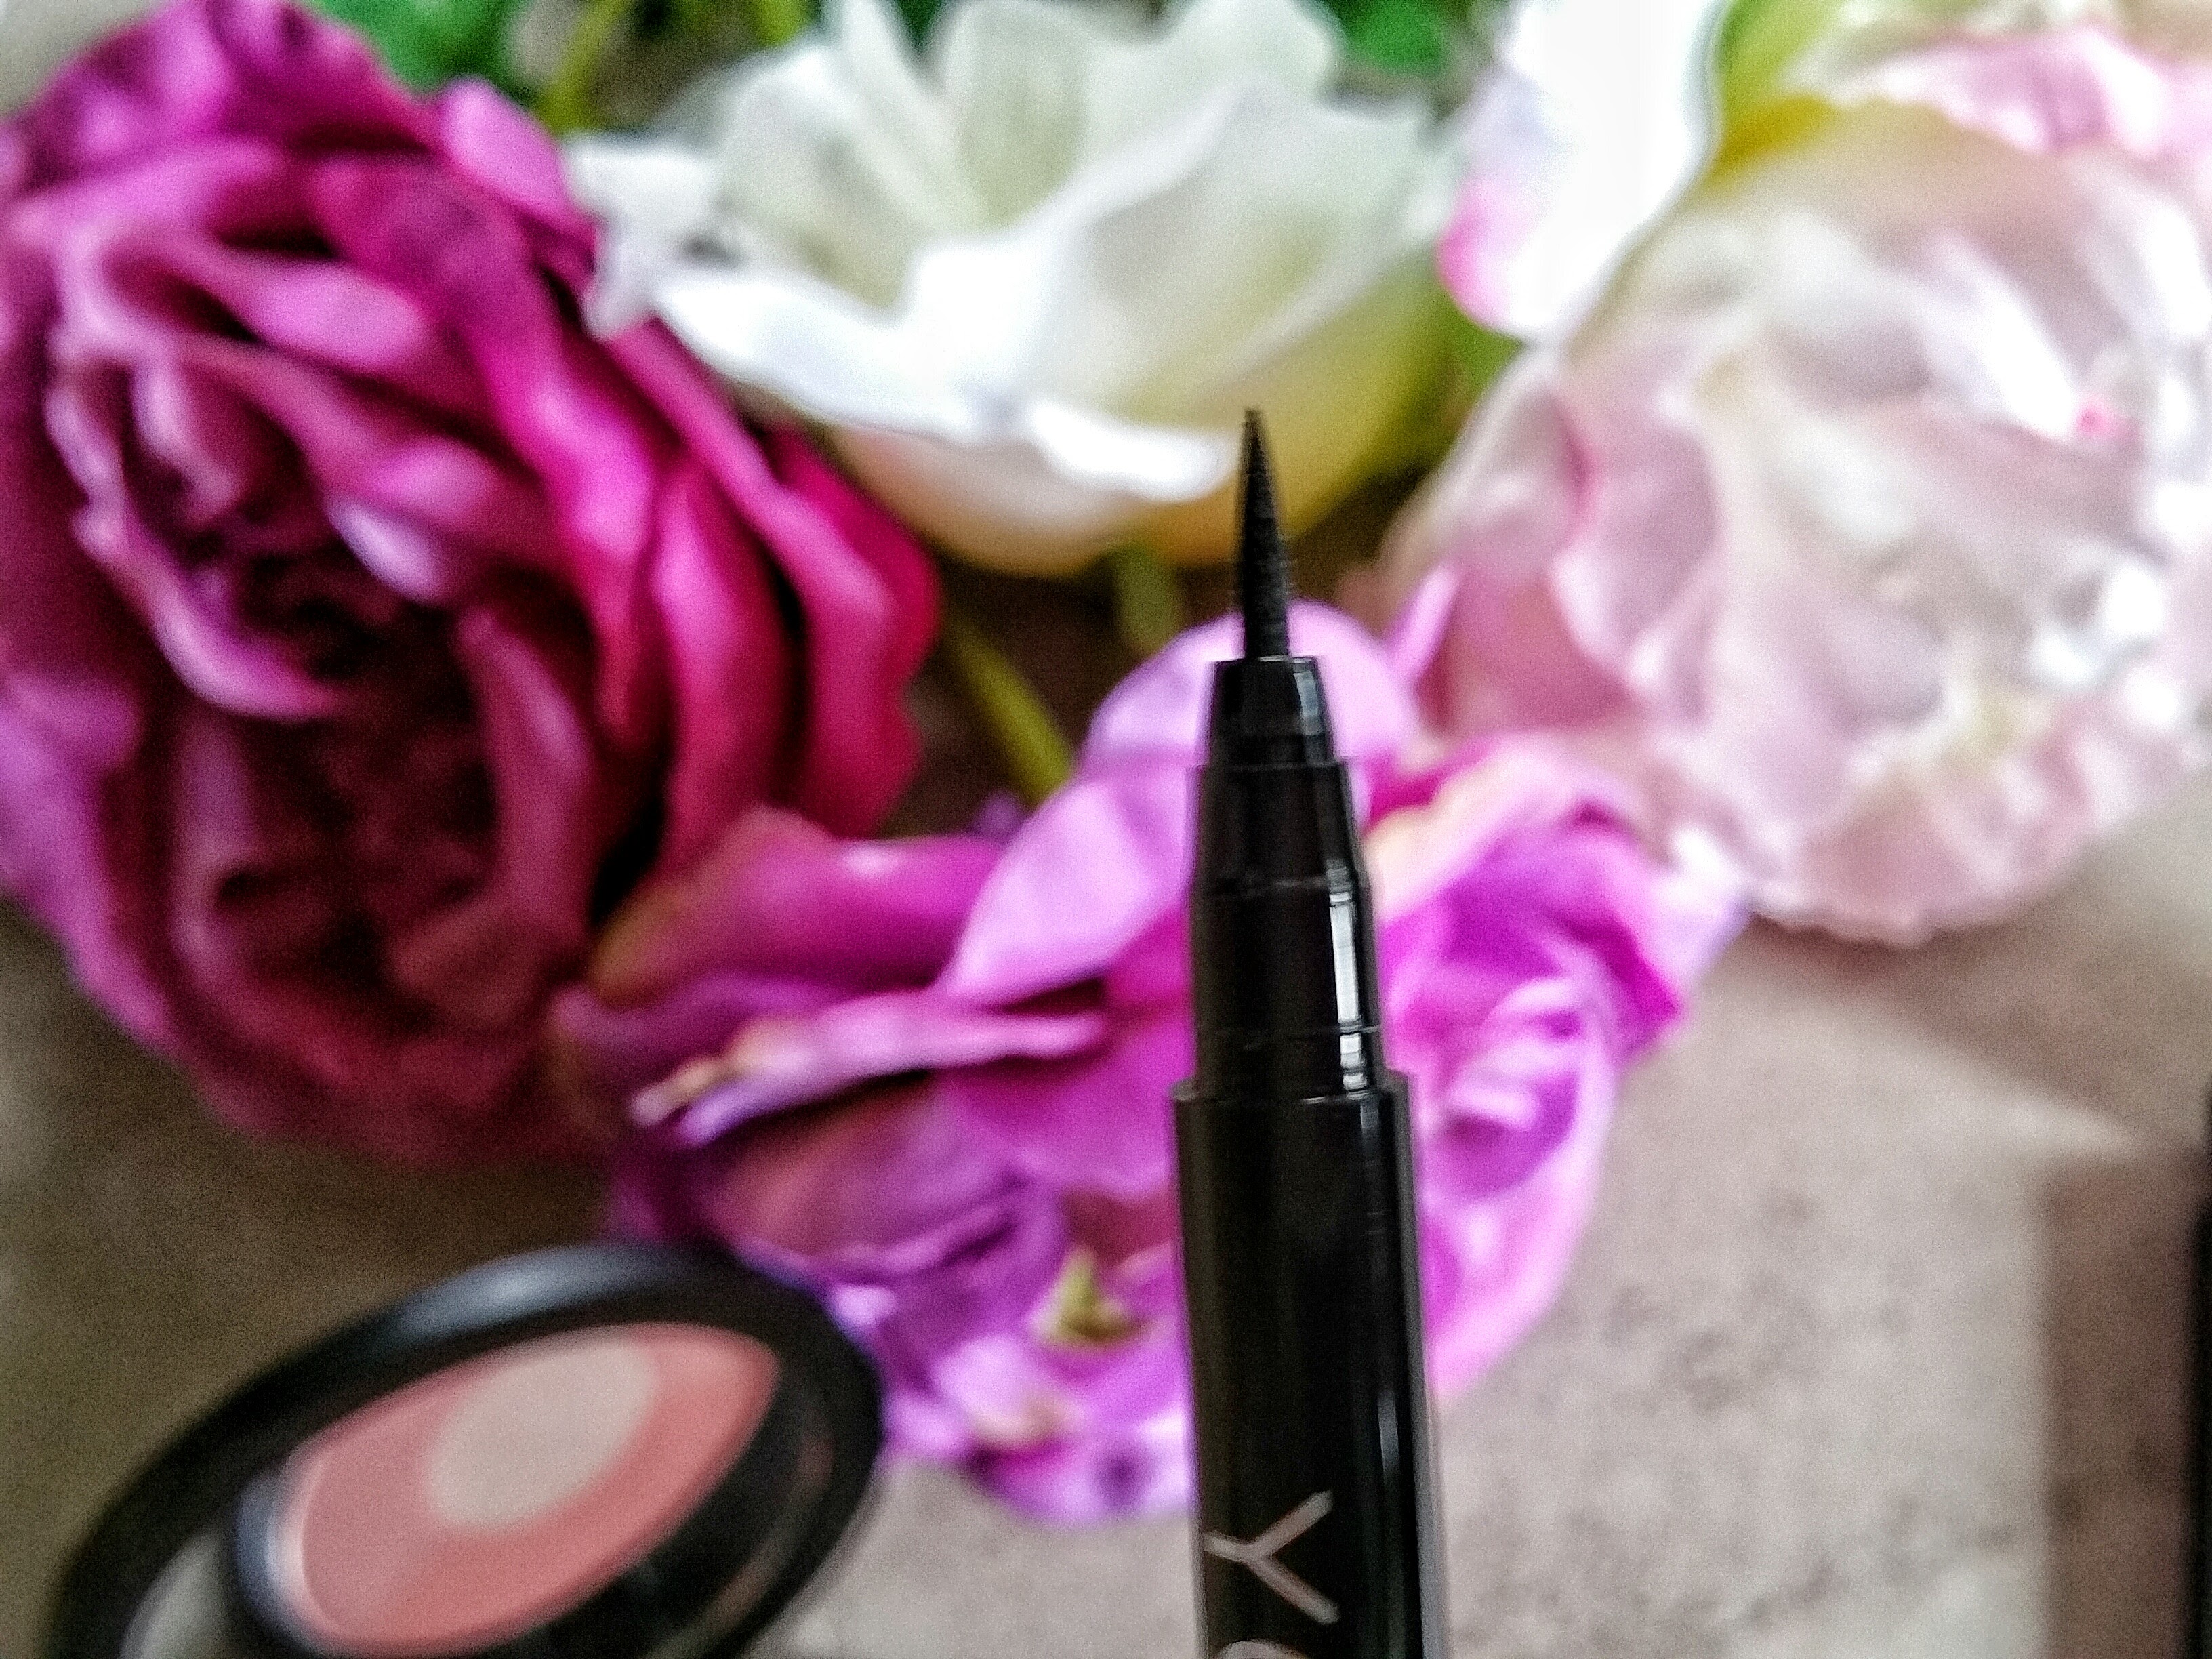 beauty, cosmetics, beauty product review, beauty review, makeup, Youngblood Cosmetics, swatches, eye shadow, lipstick, eyeliner, blush, shimmer brick, beautiful, 